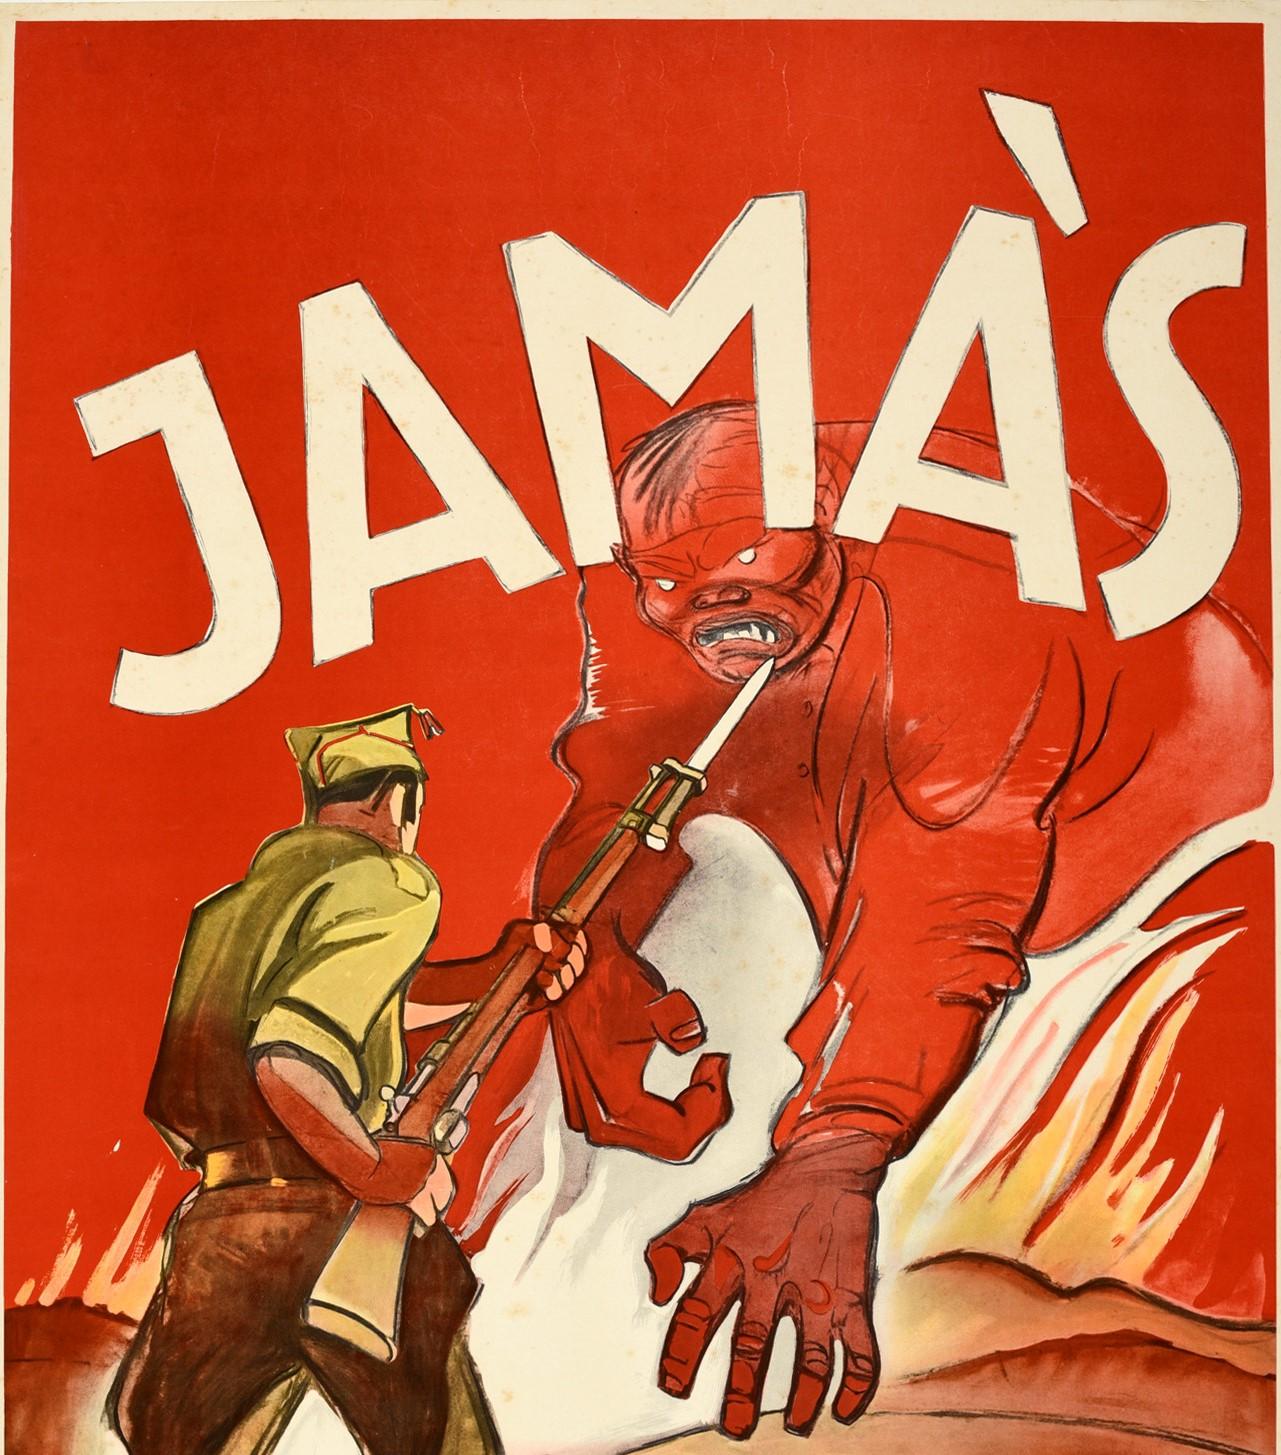 Original vintage anti Communist Spanish Civil War propaganda poster, Jamas / Never, featuring a dynamic image of a Spanish soldier protecting his family by using a bayonet rifle gun to fend off a devilish red communist man reaching over the